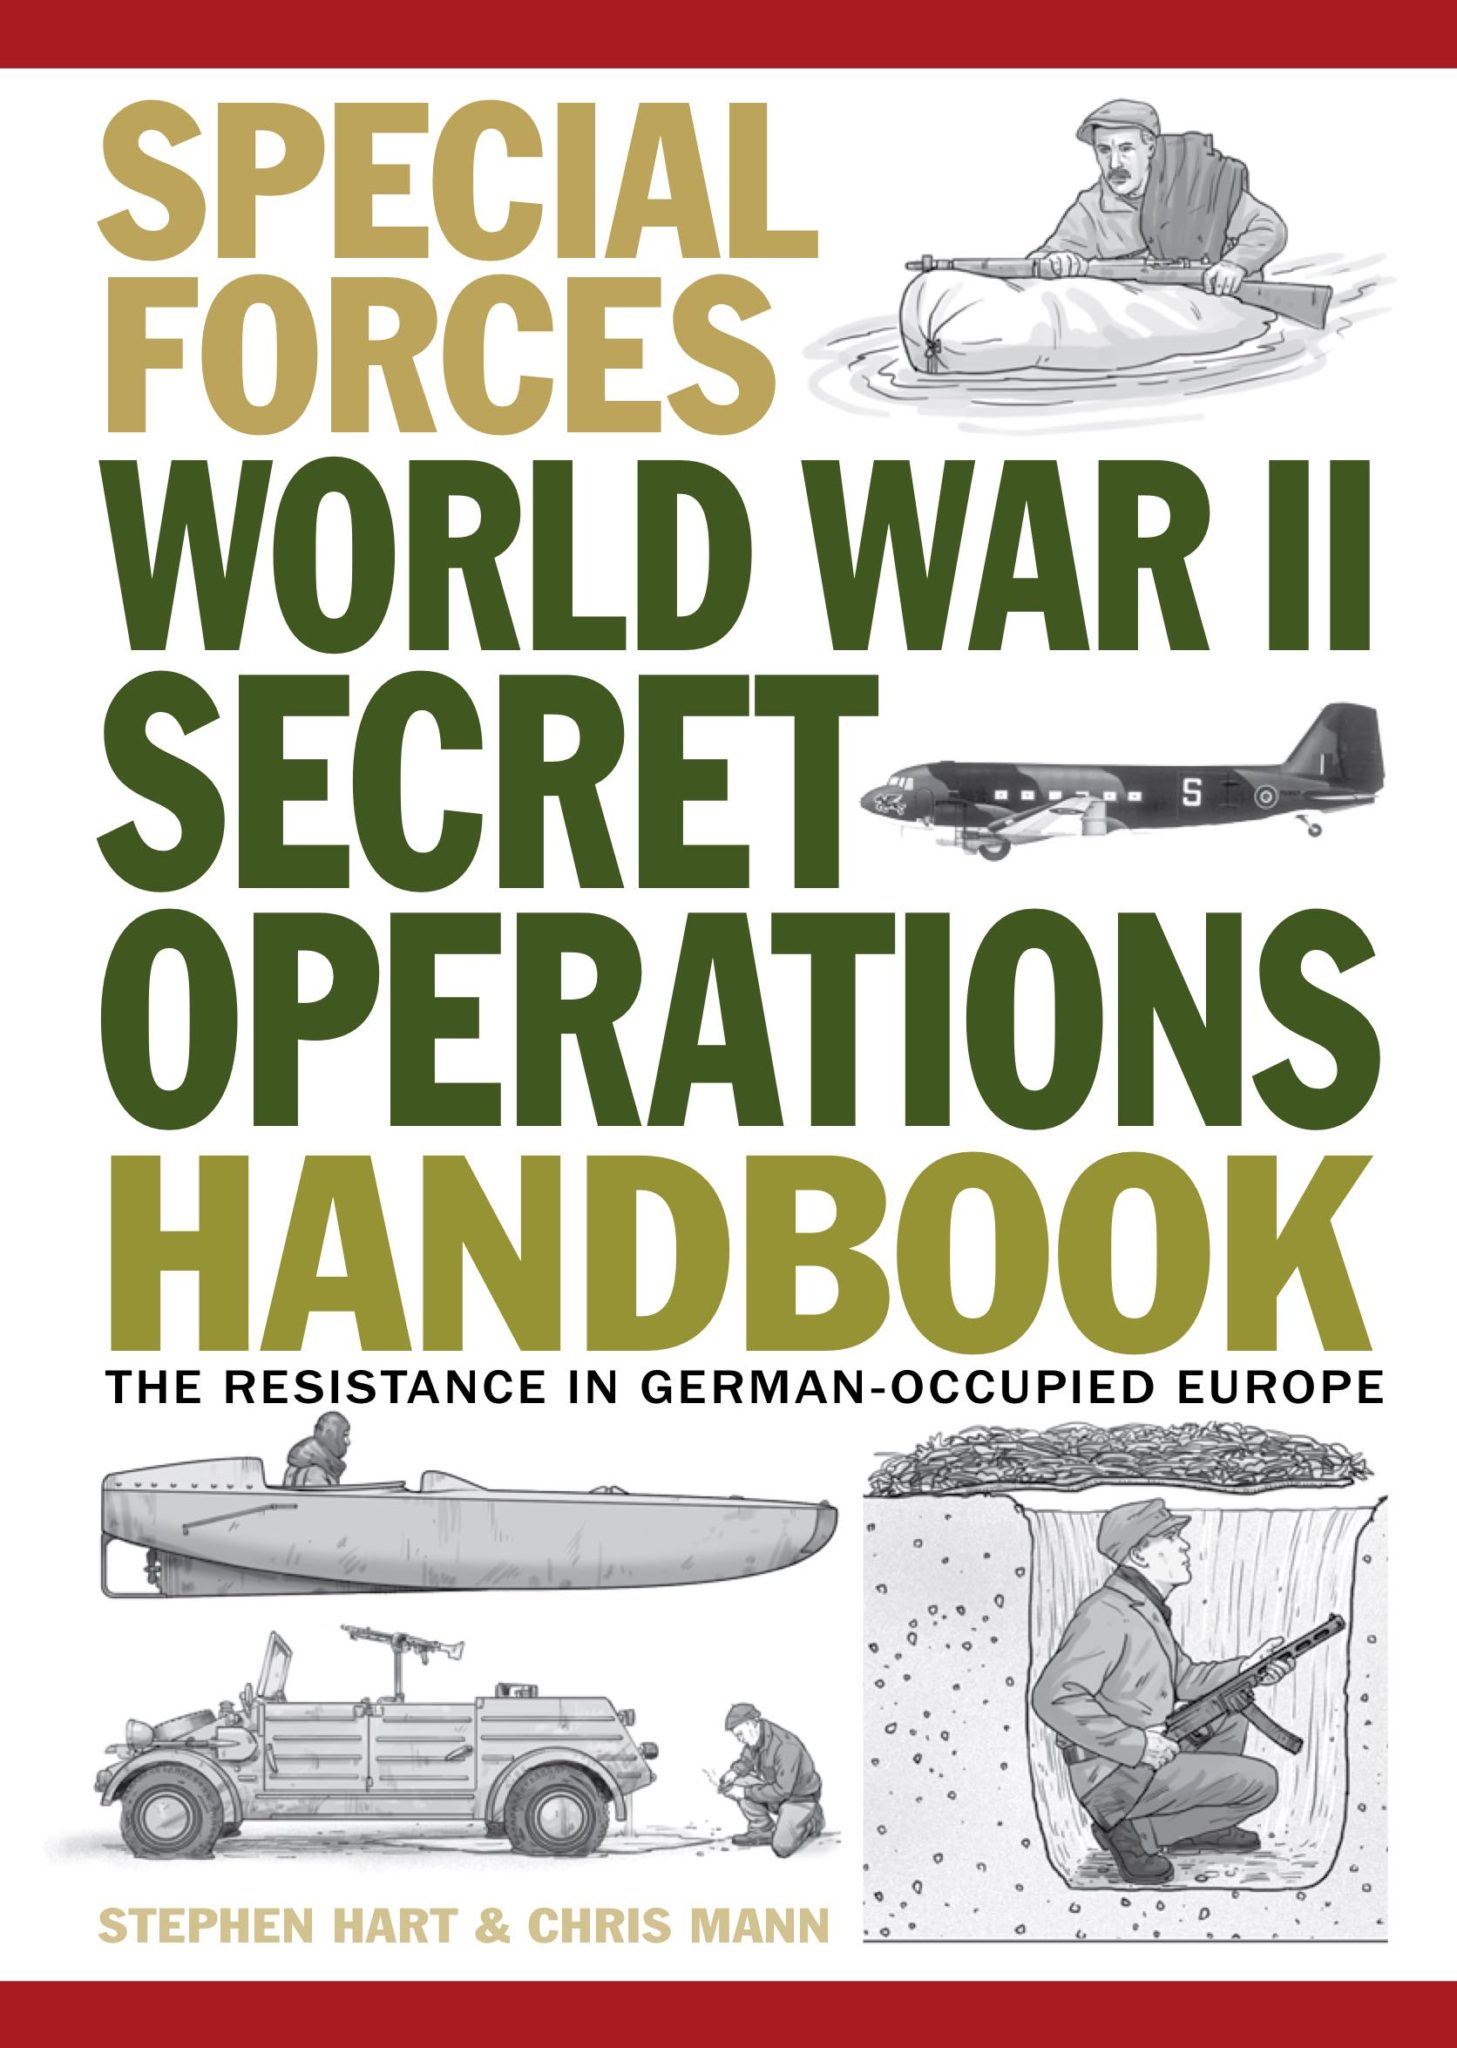 WWII secret operations guide